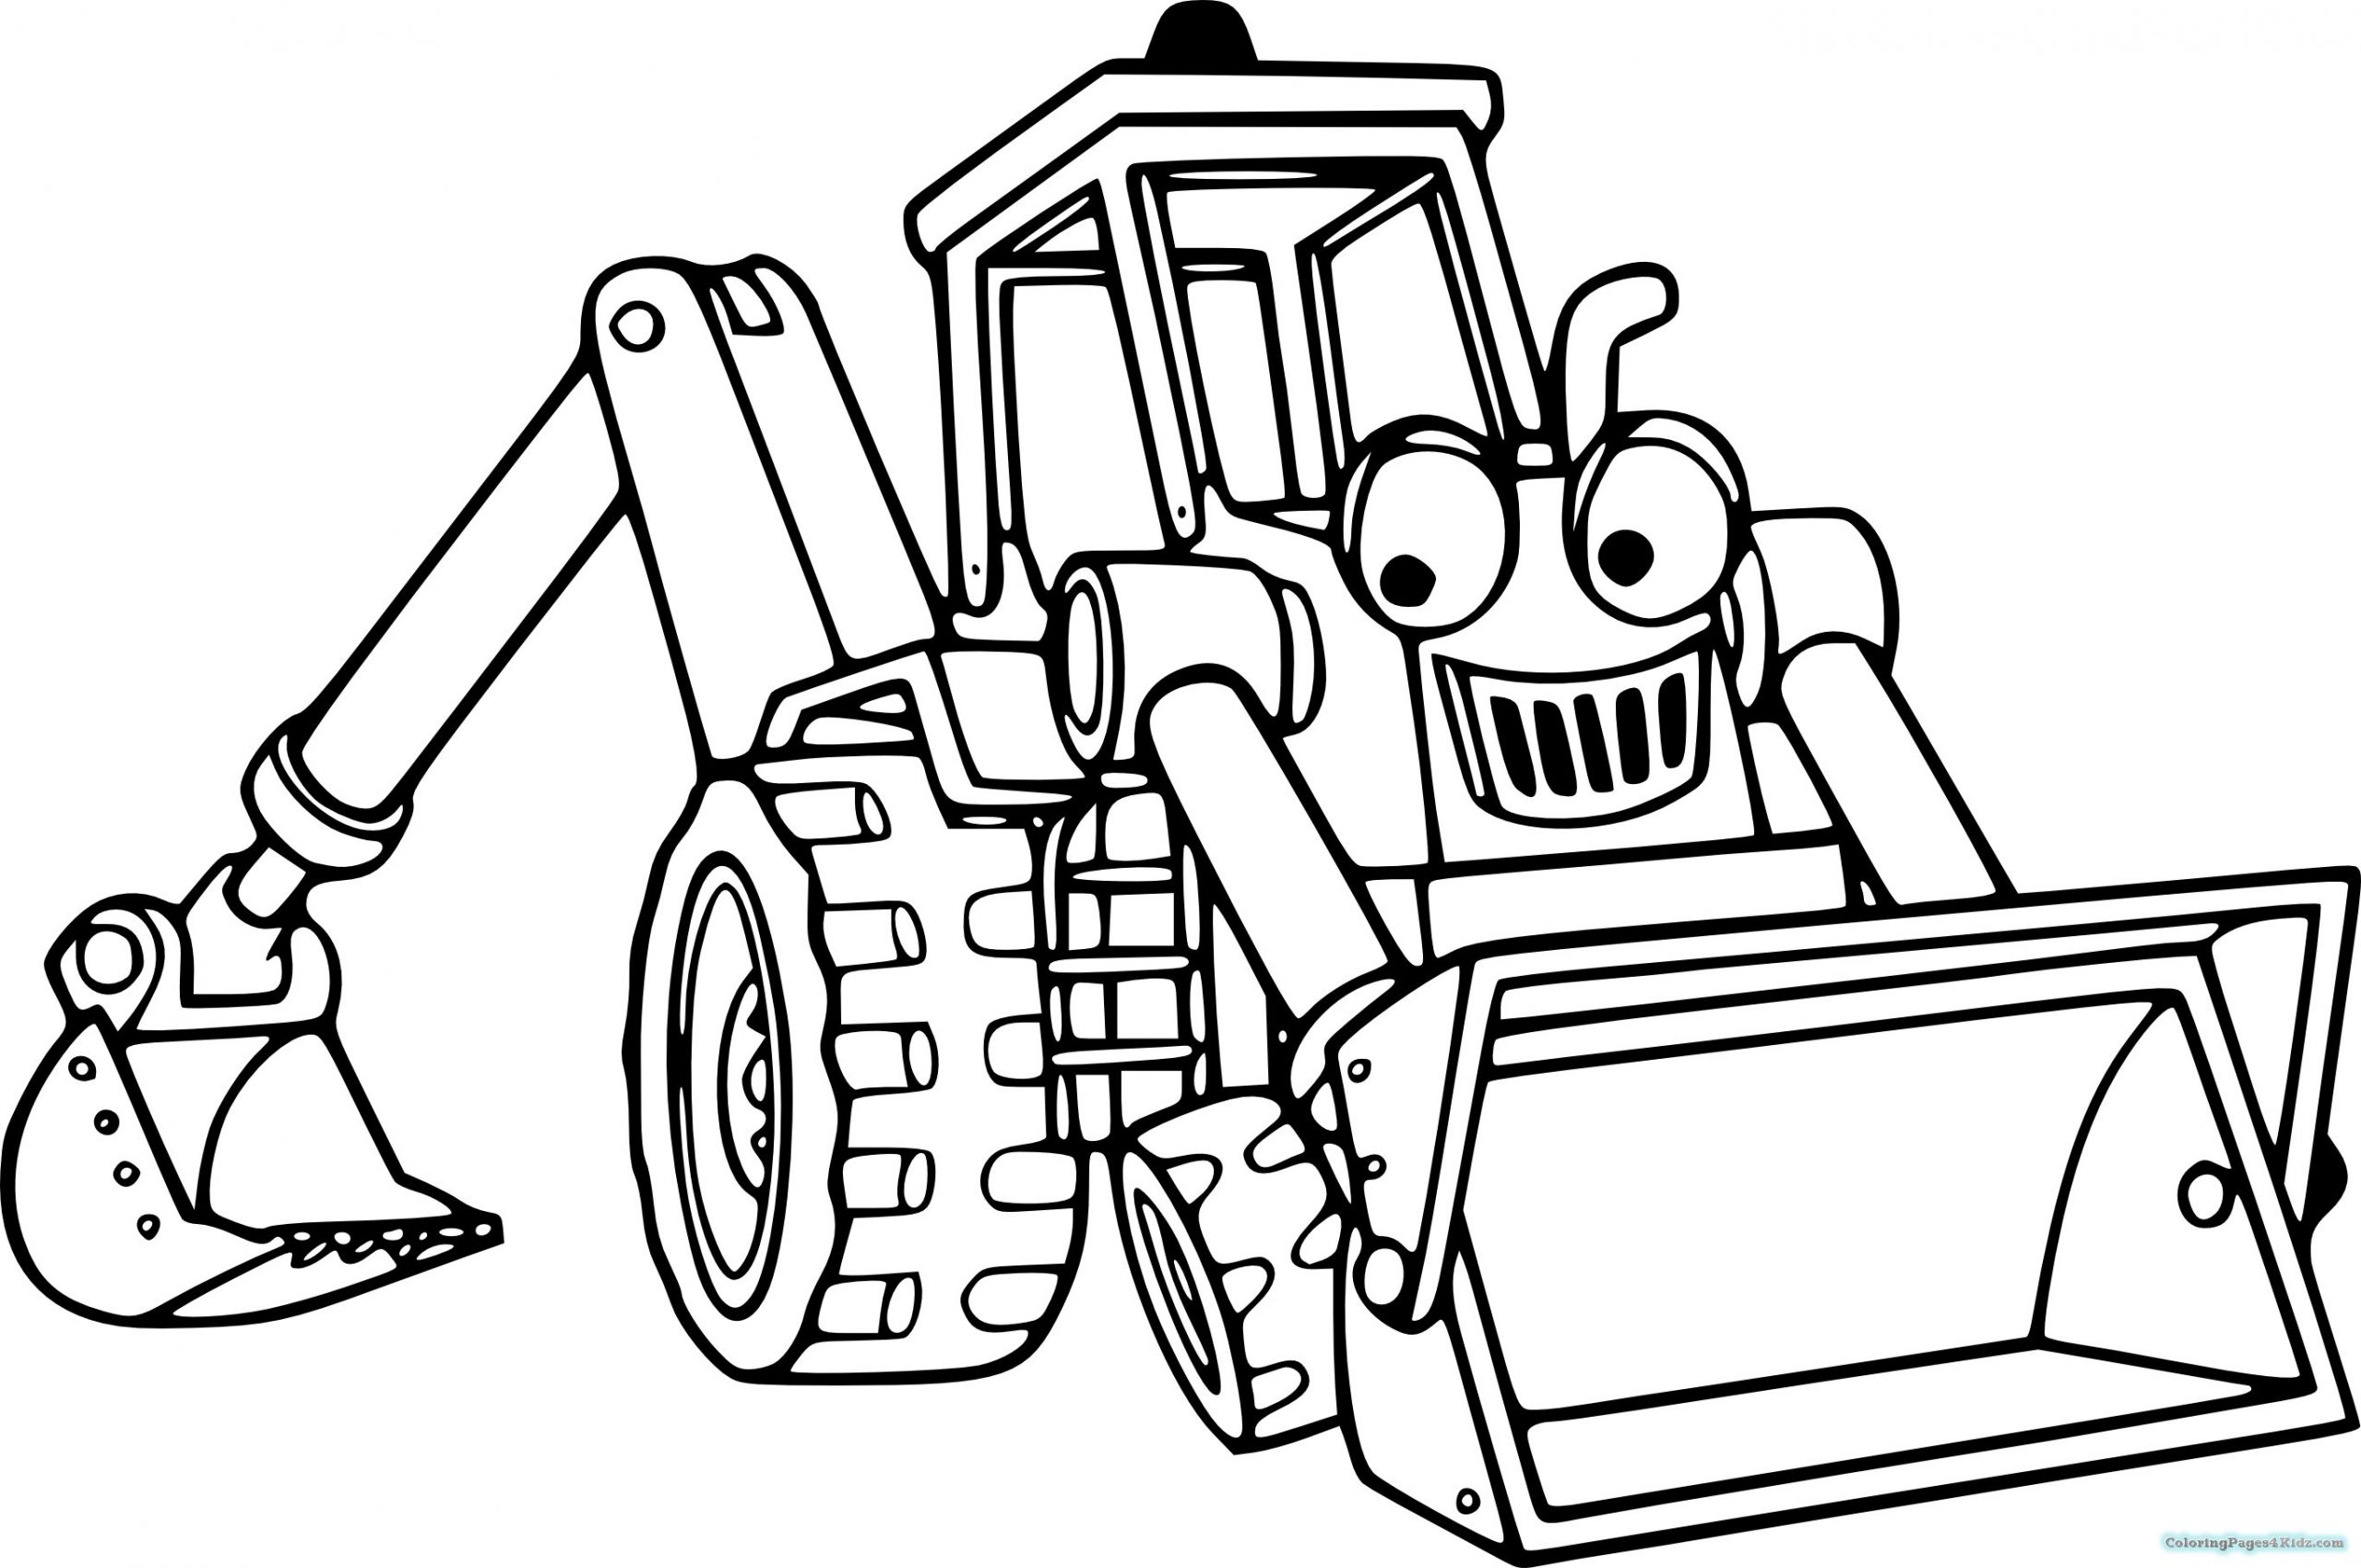 Tractor Coloring Pages For Kids
 Johnny Tractor Free Coloring Pages